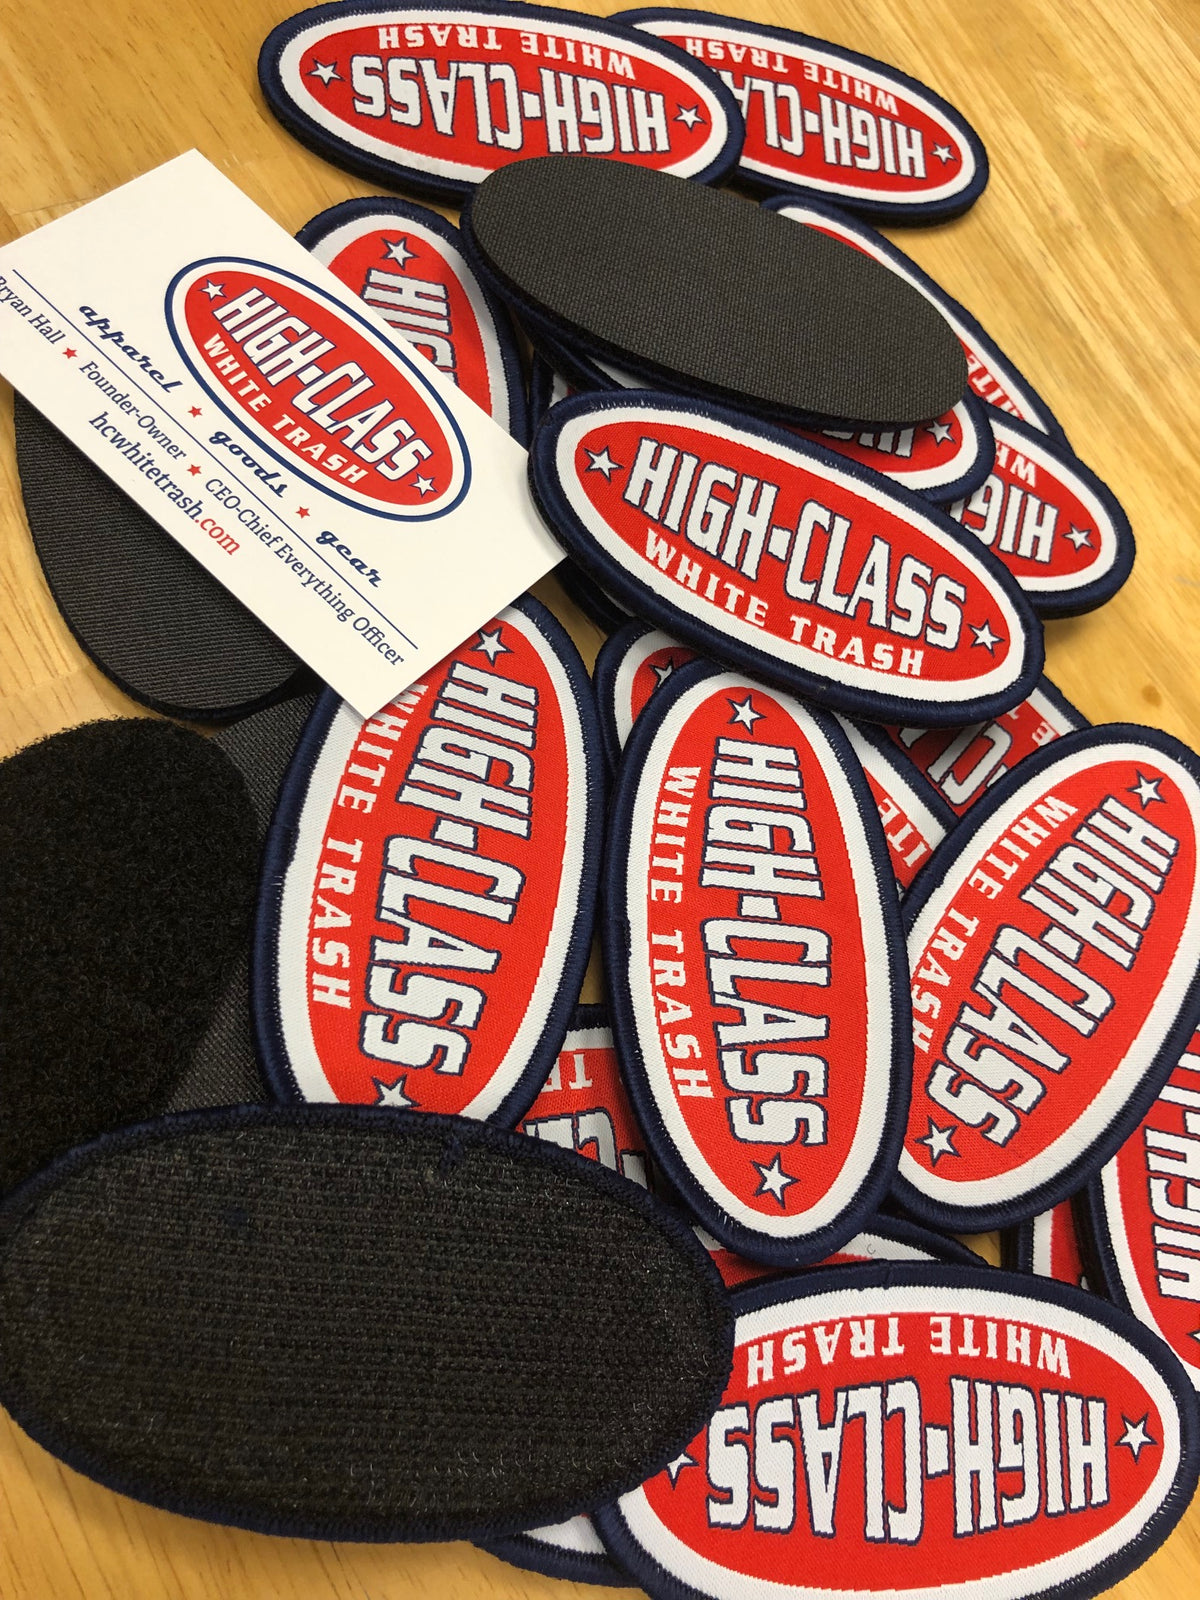 High Class White Trash Patch (Velcro with Backing)